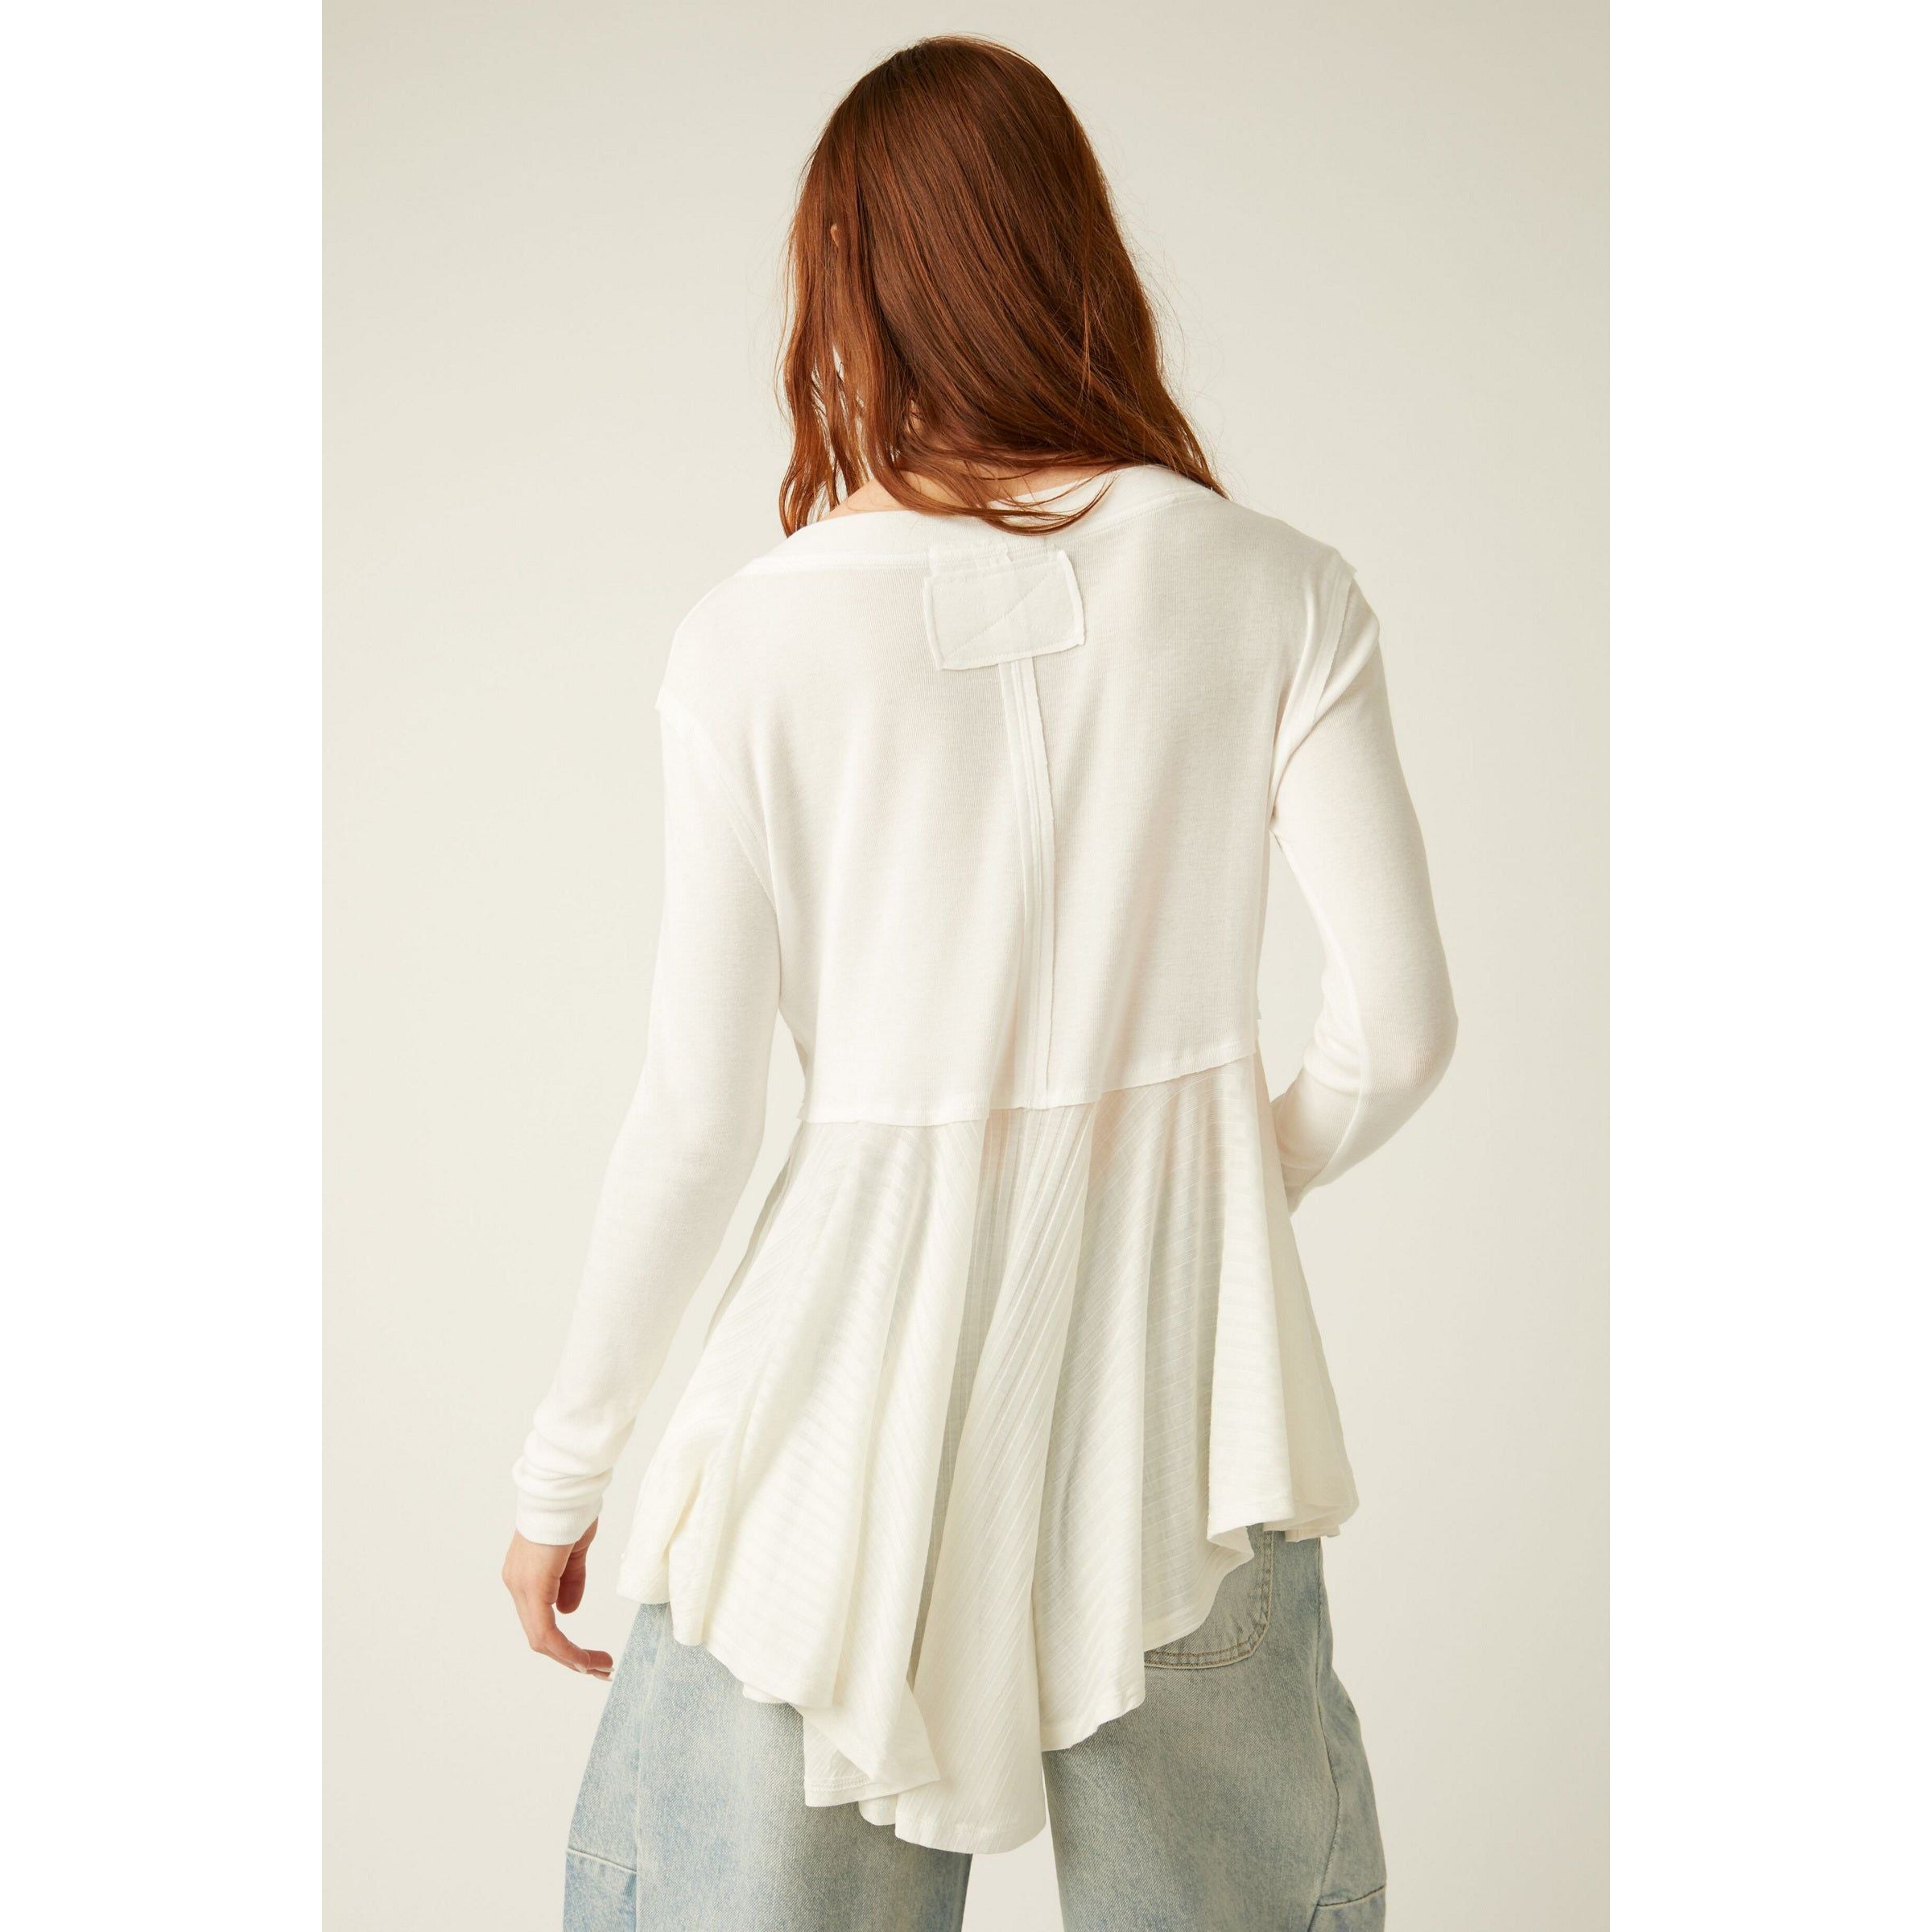 Free People - We The Free Clover Babydoll Top in Ivory